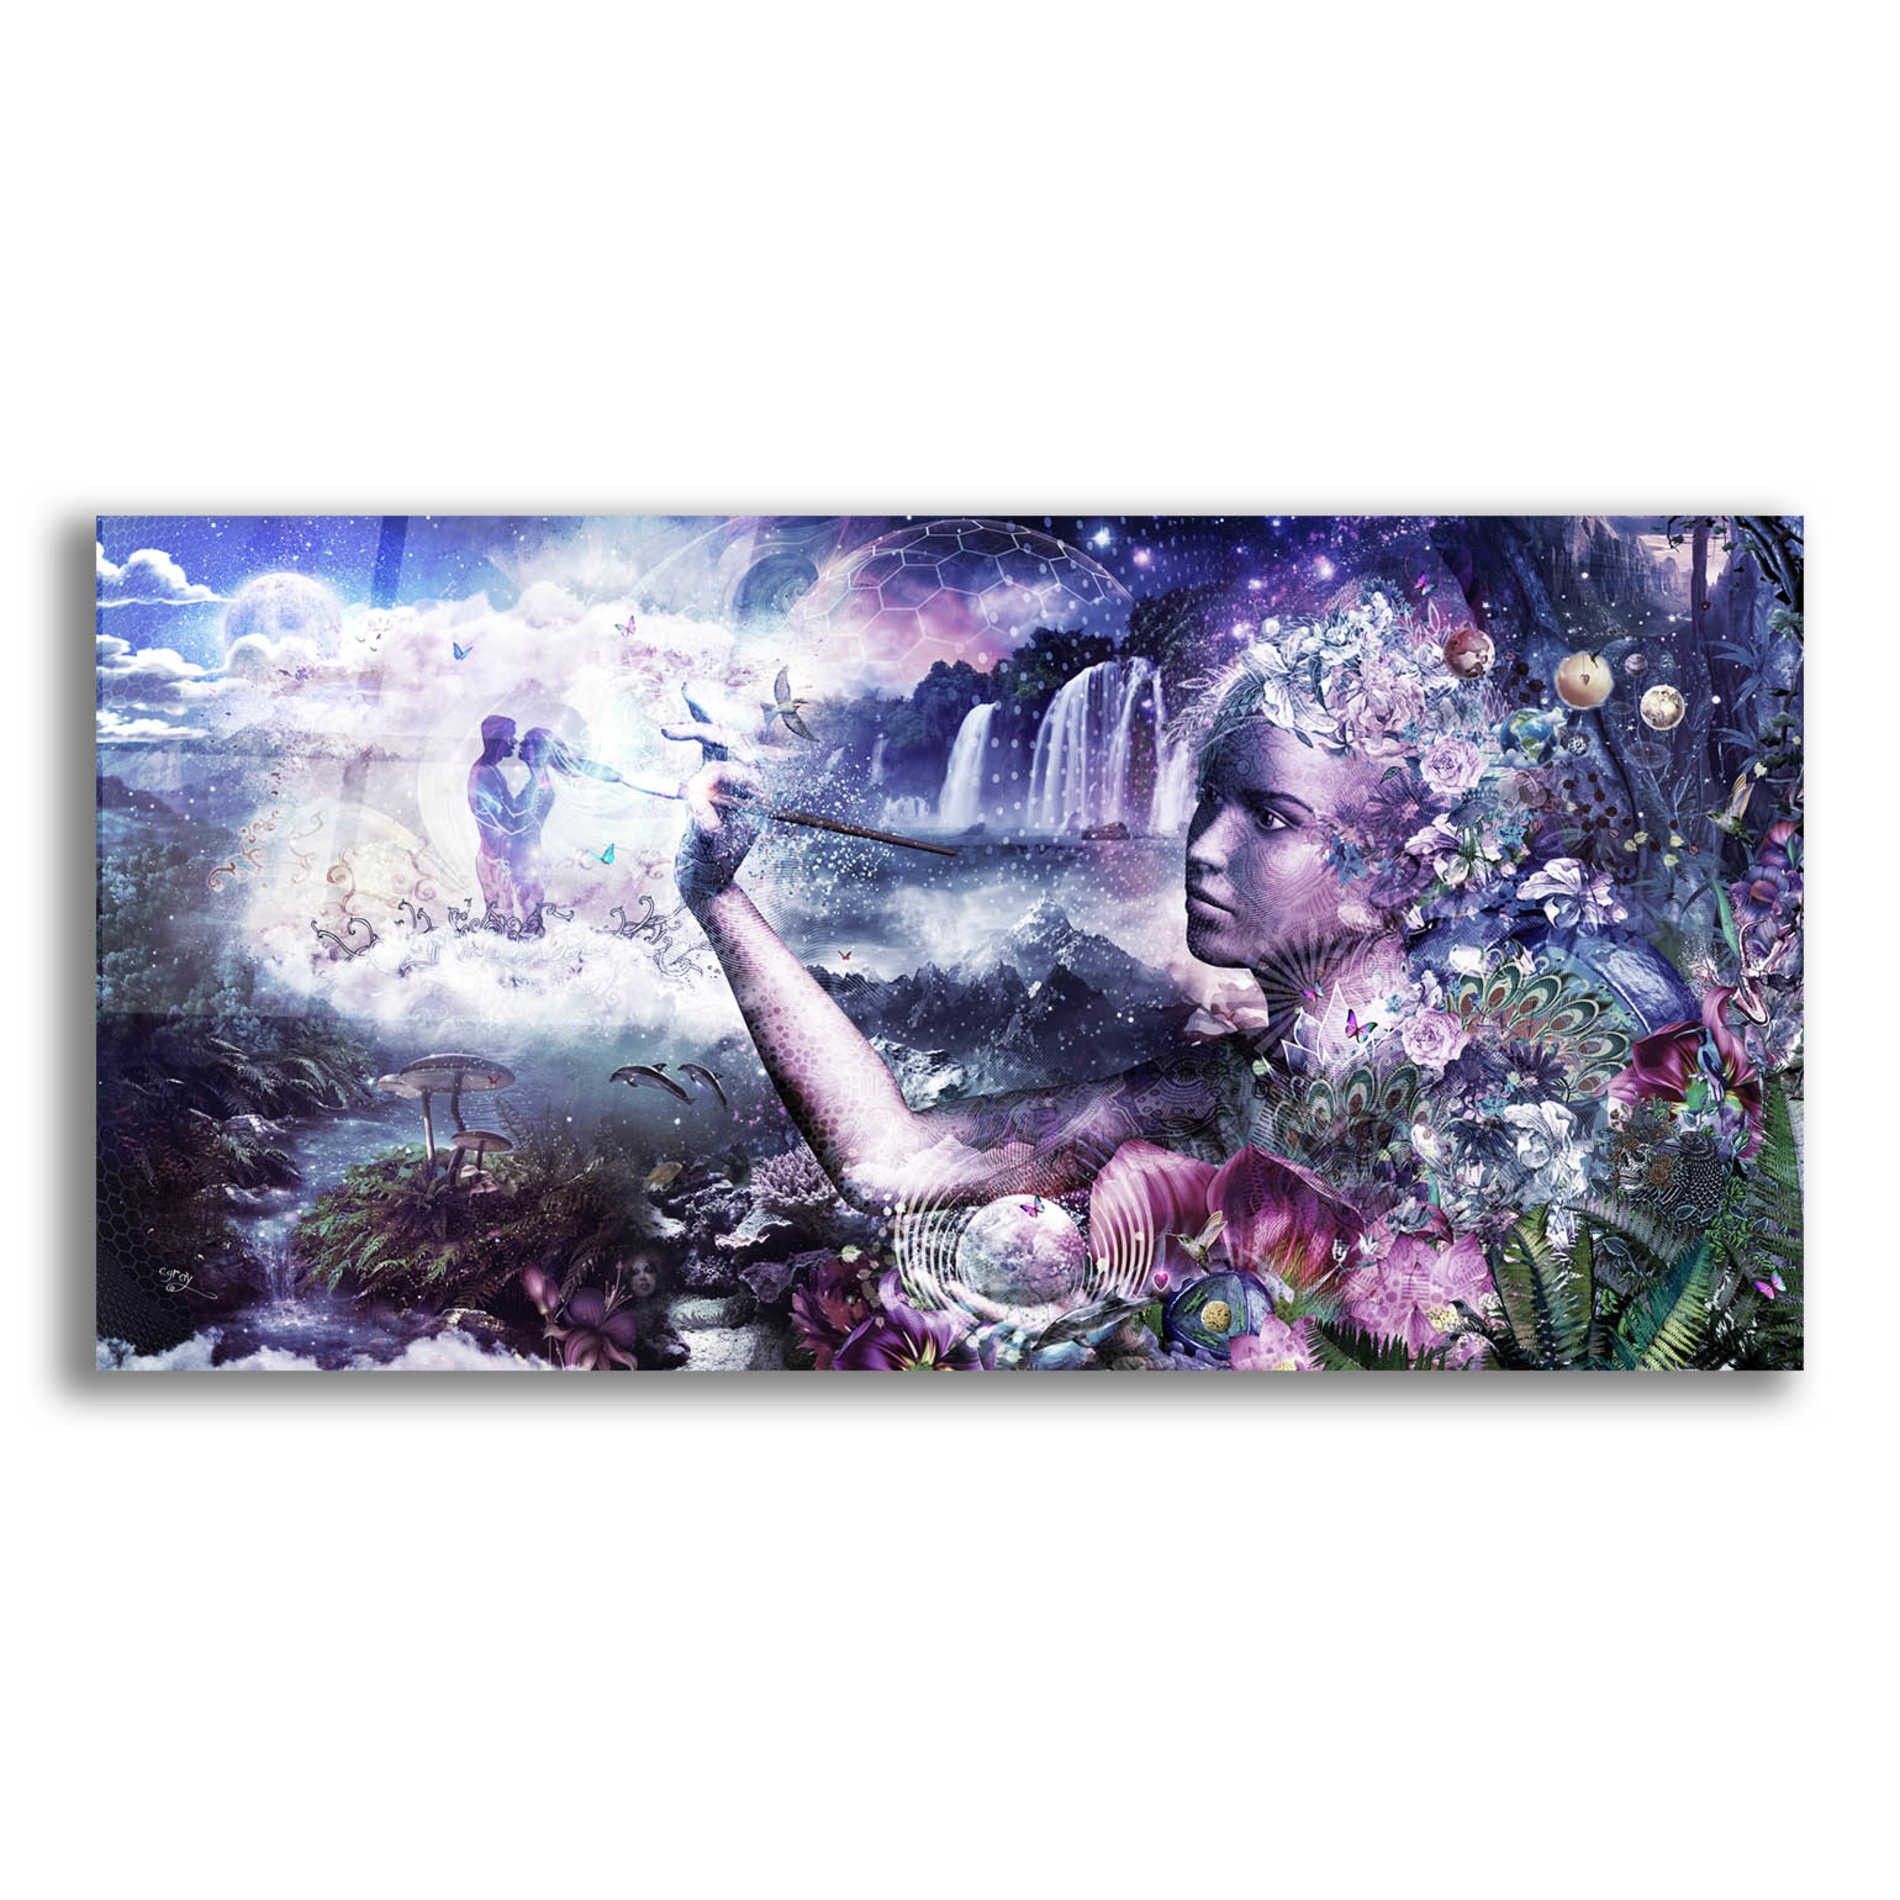 Epic Art 'The Painter' by Cameron Gray, Acrylic Glass Wall Art